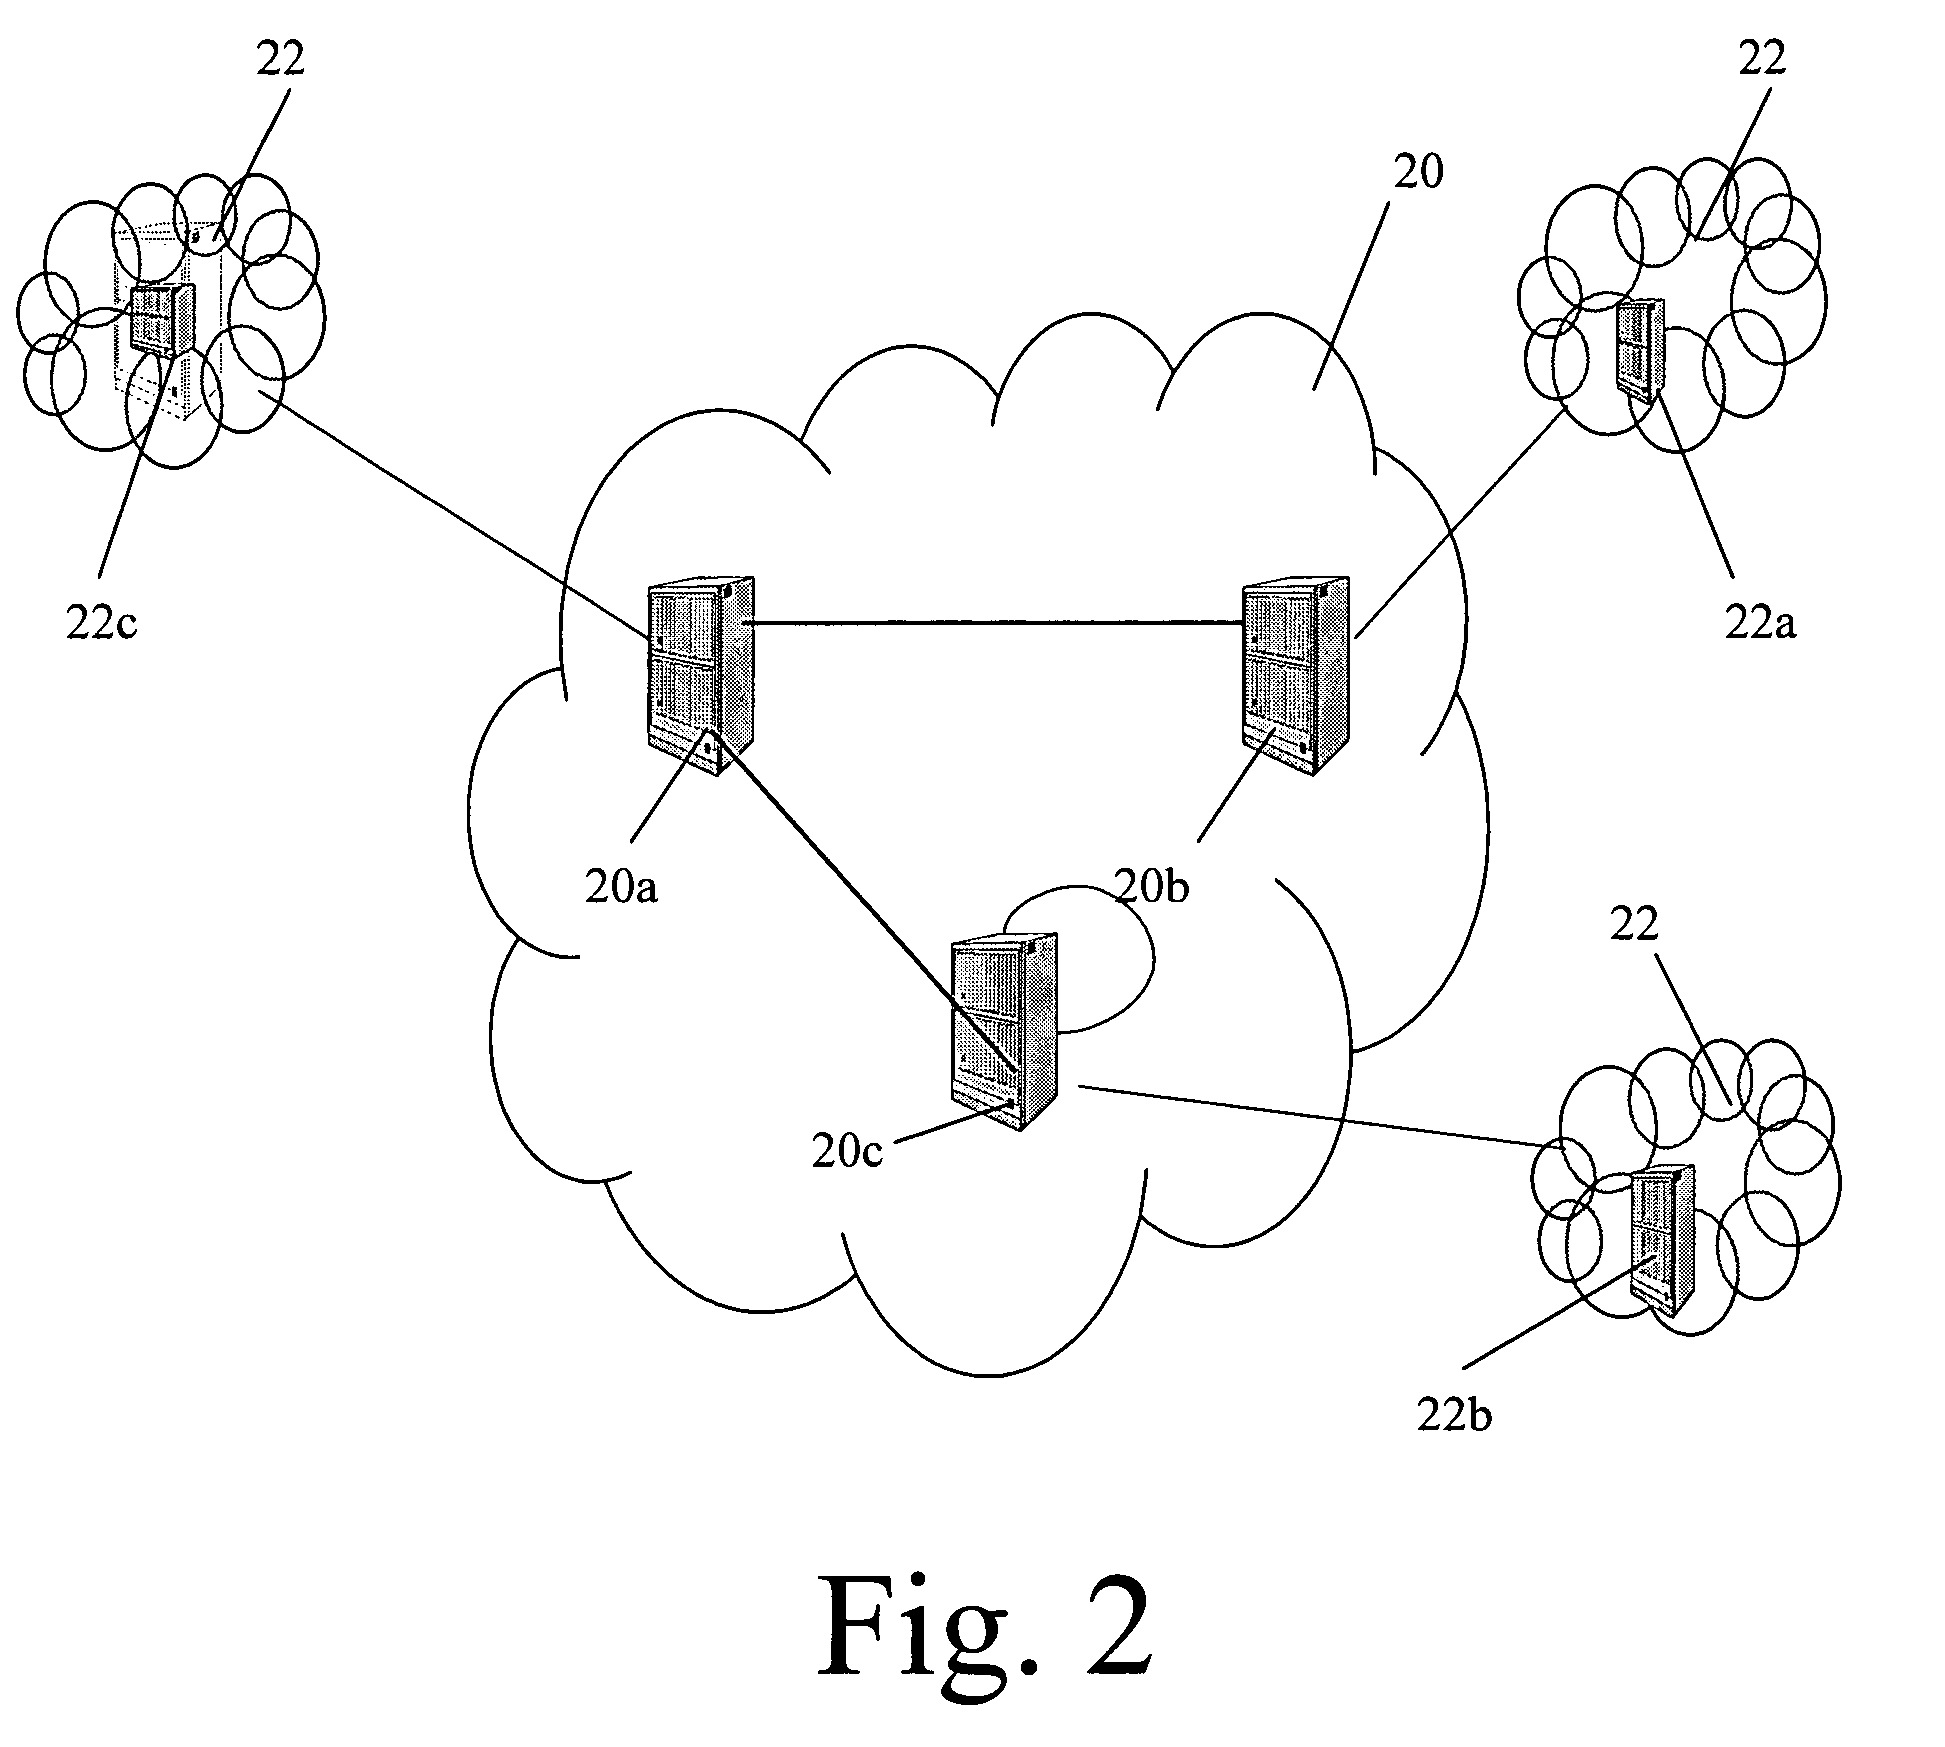 System and method for testing automated provisioning and maintenance of Operations Support Systems